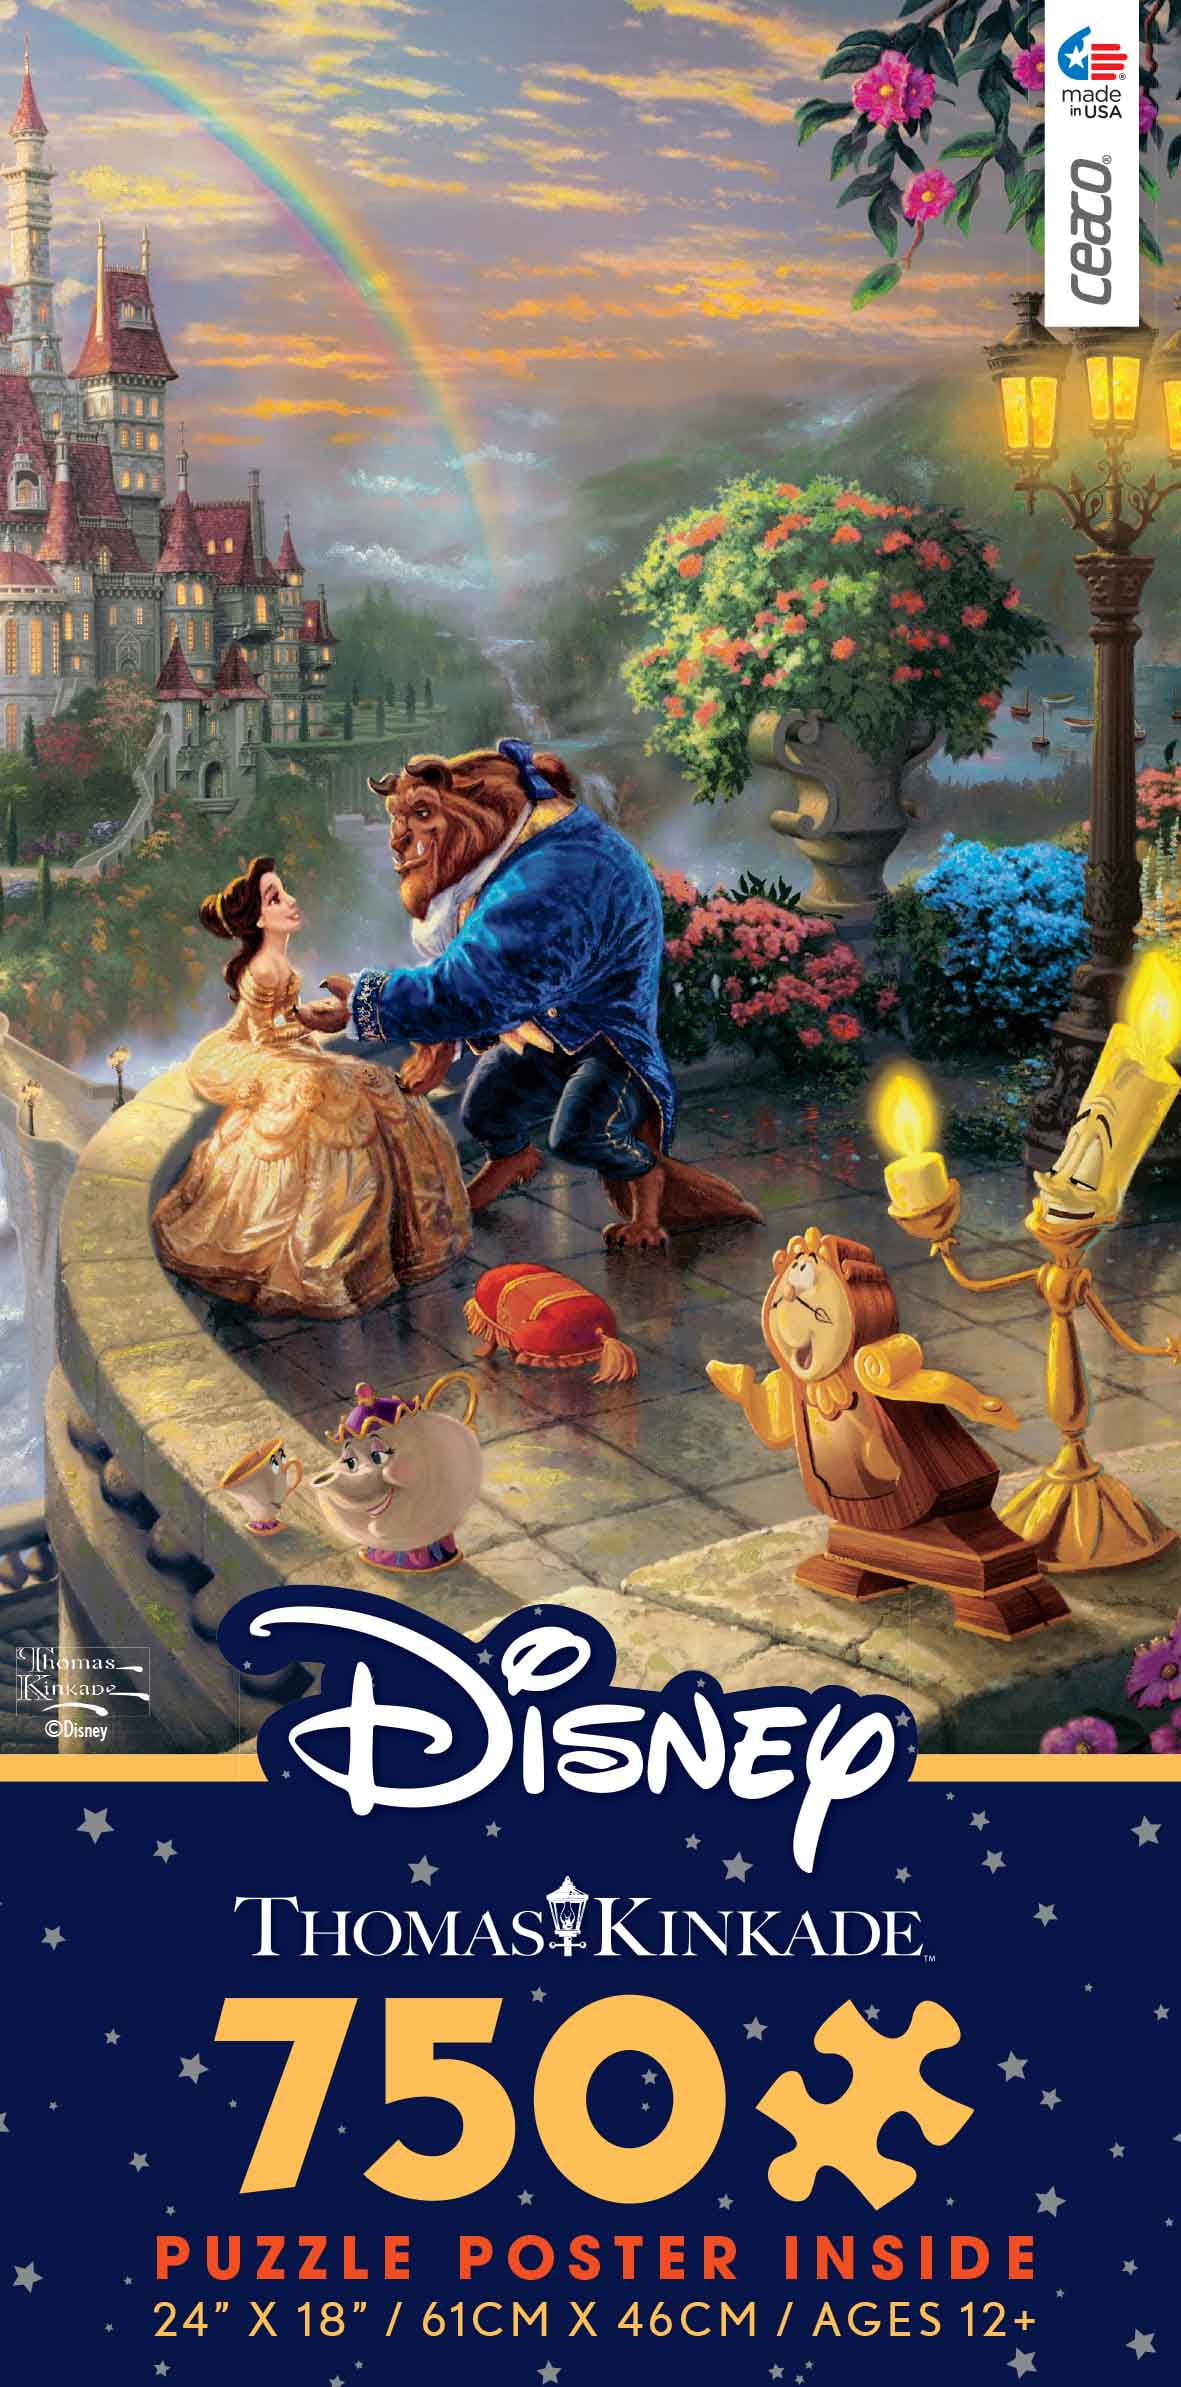 1000 Pieces Ceaco Thomas Kinkade Beauty and the Beast Jigsaw Puzzle for sale online 332845